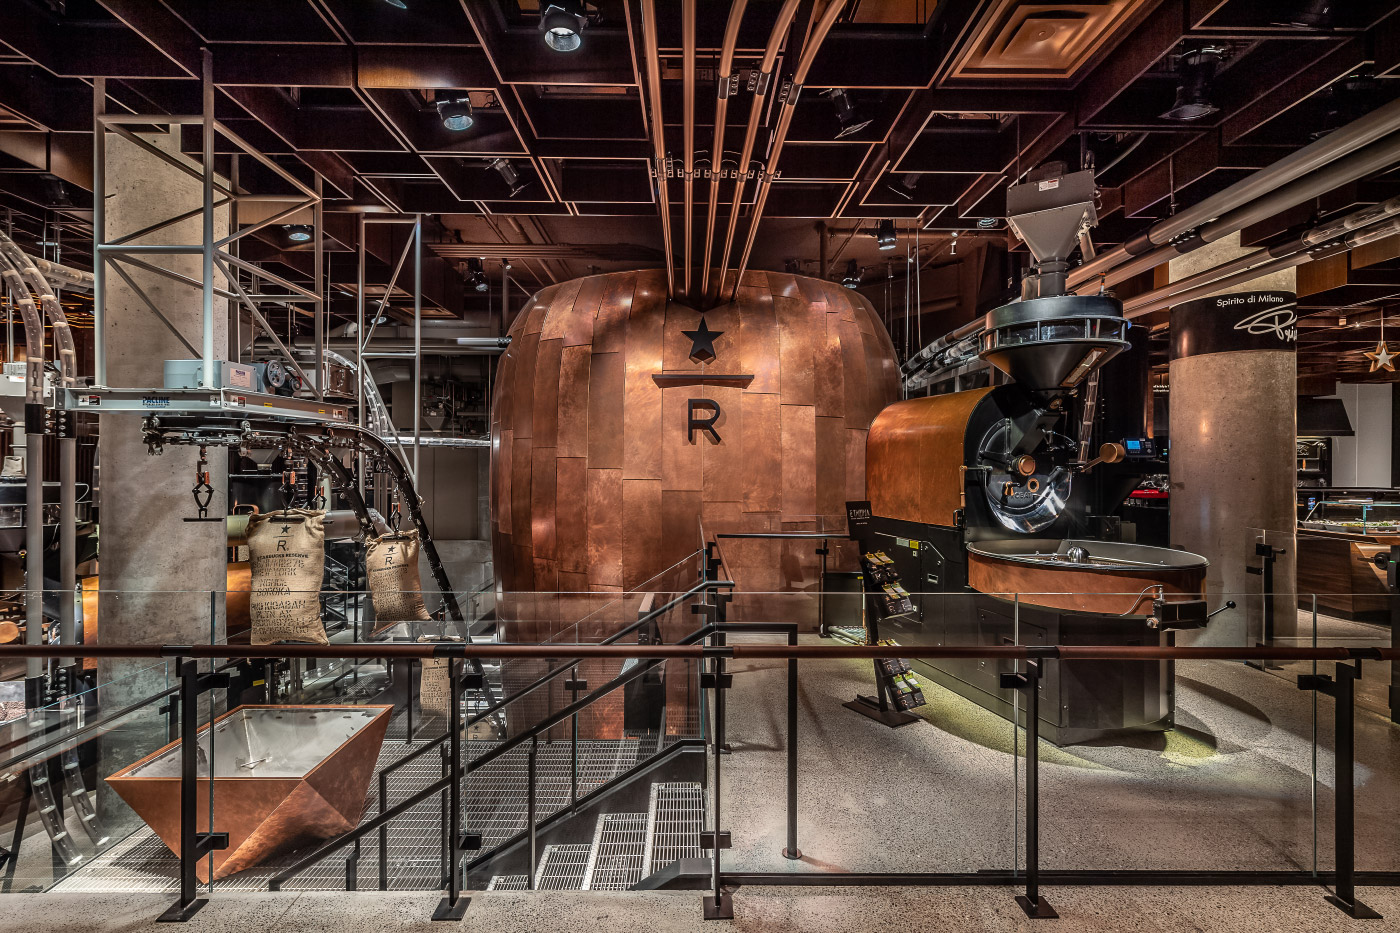 Starbucks Reserve Roastery New York A 30-foot-tall copper kettle greets visitors as soon as they enter.